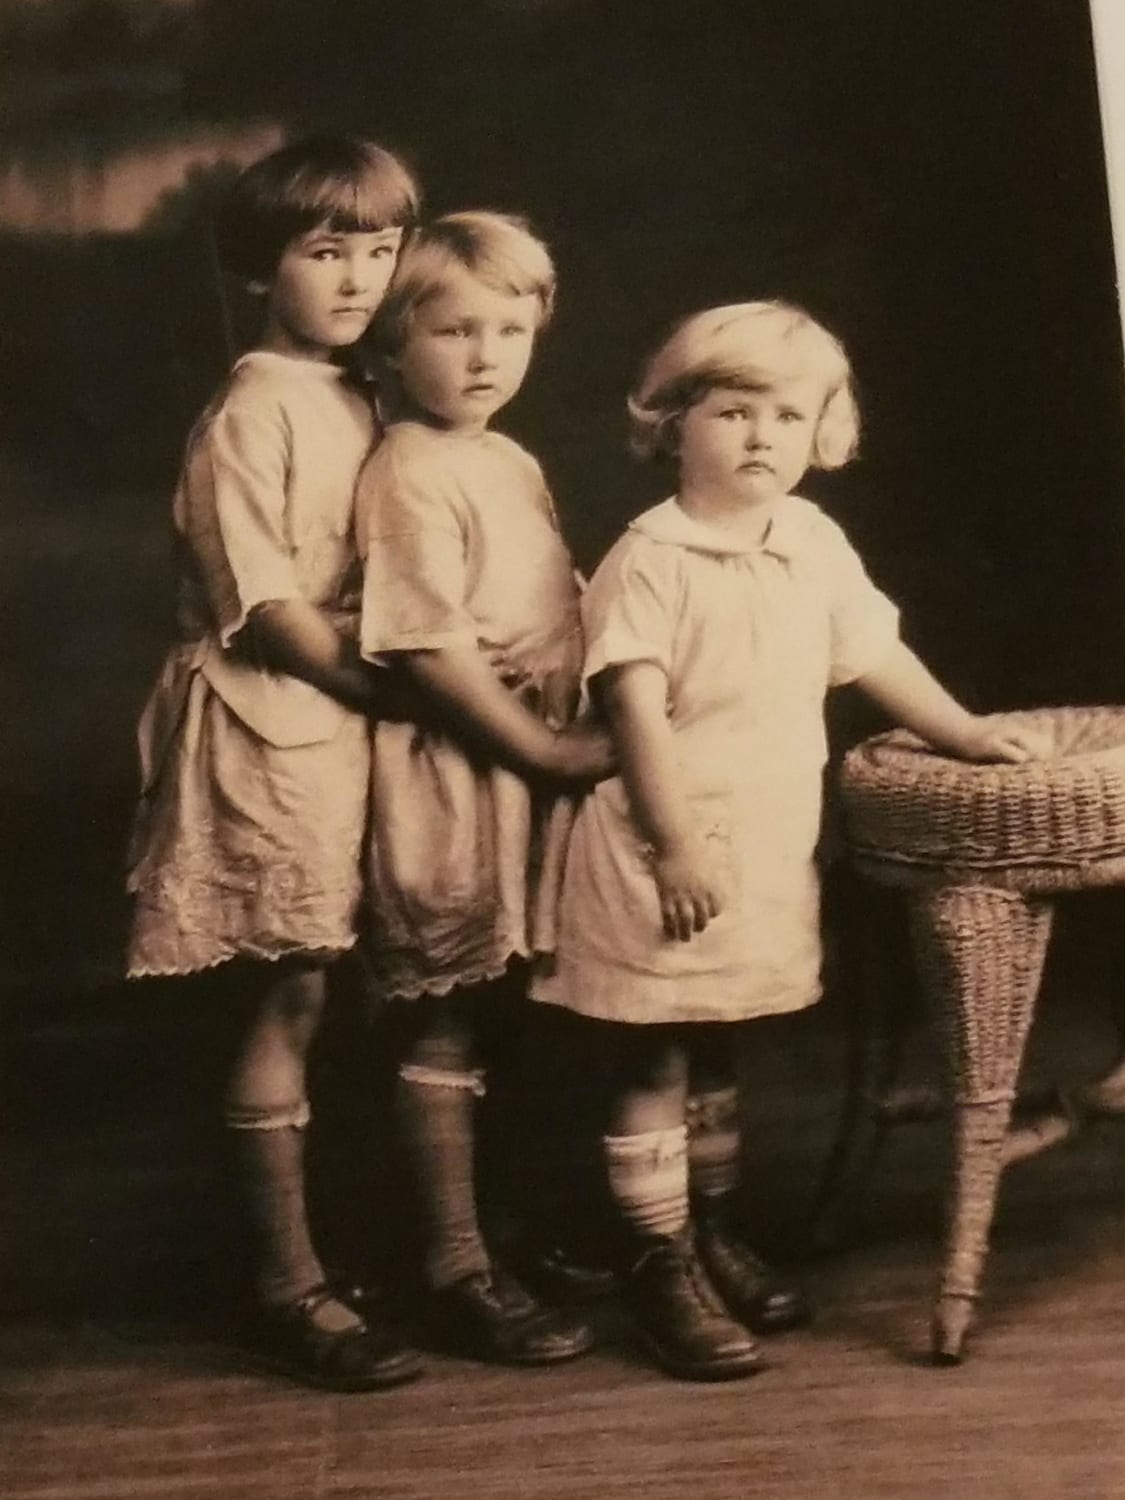 My mom (center) and two of her siblings, late 1920s.